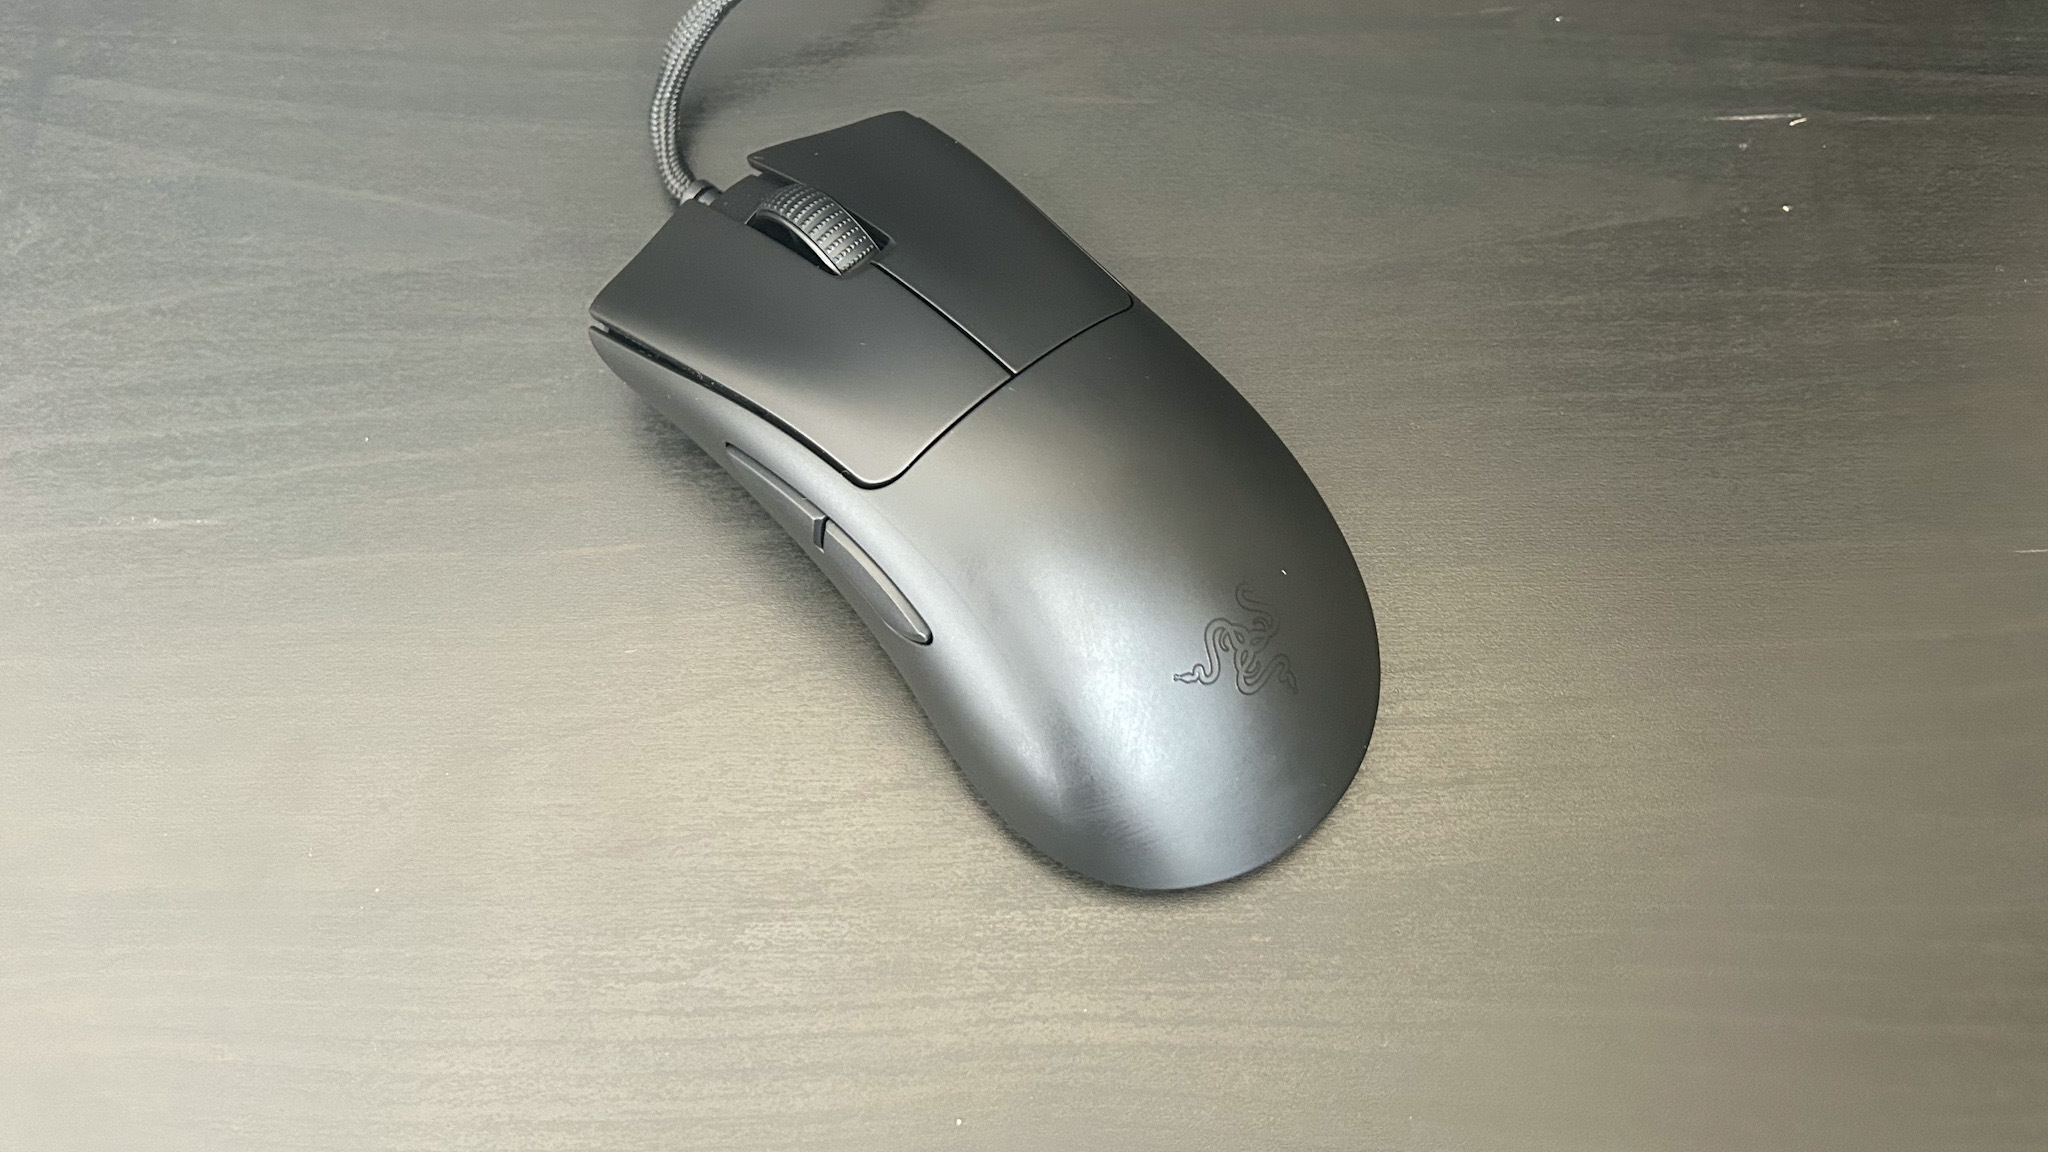 Razer DeathAdder V3 review: 'An FPS mouse for those who hate FPS mice